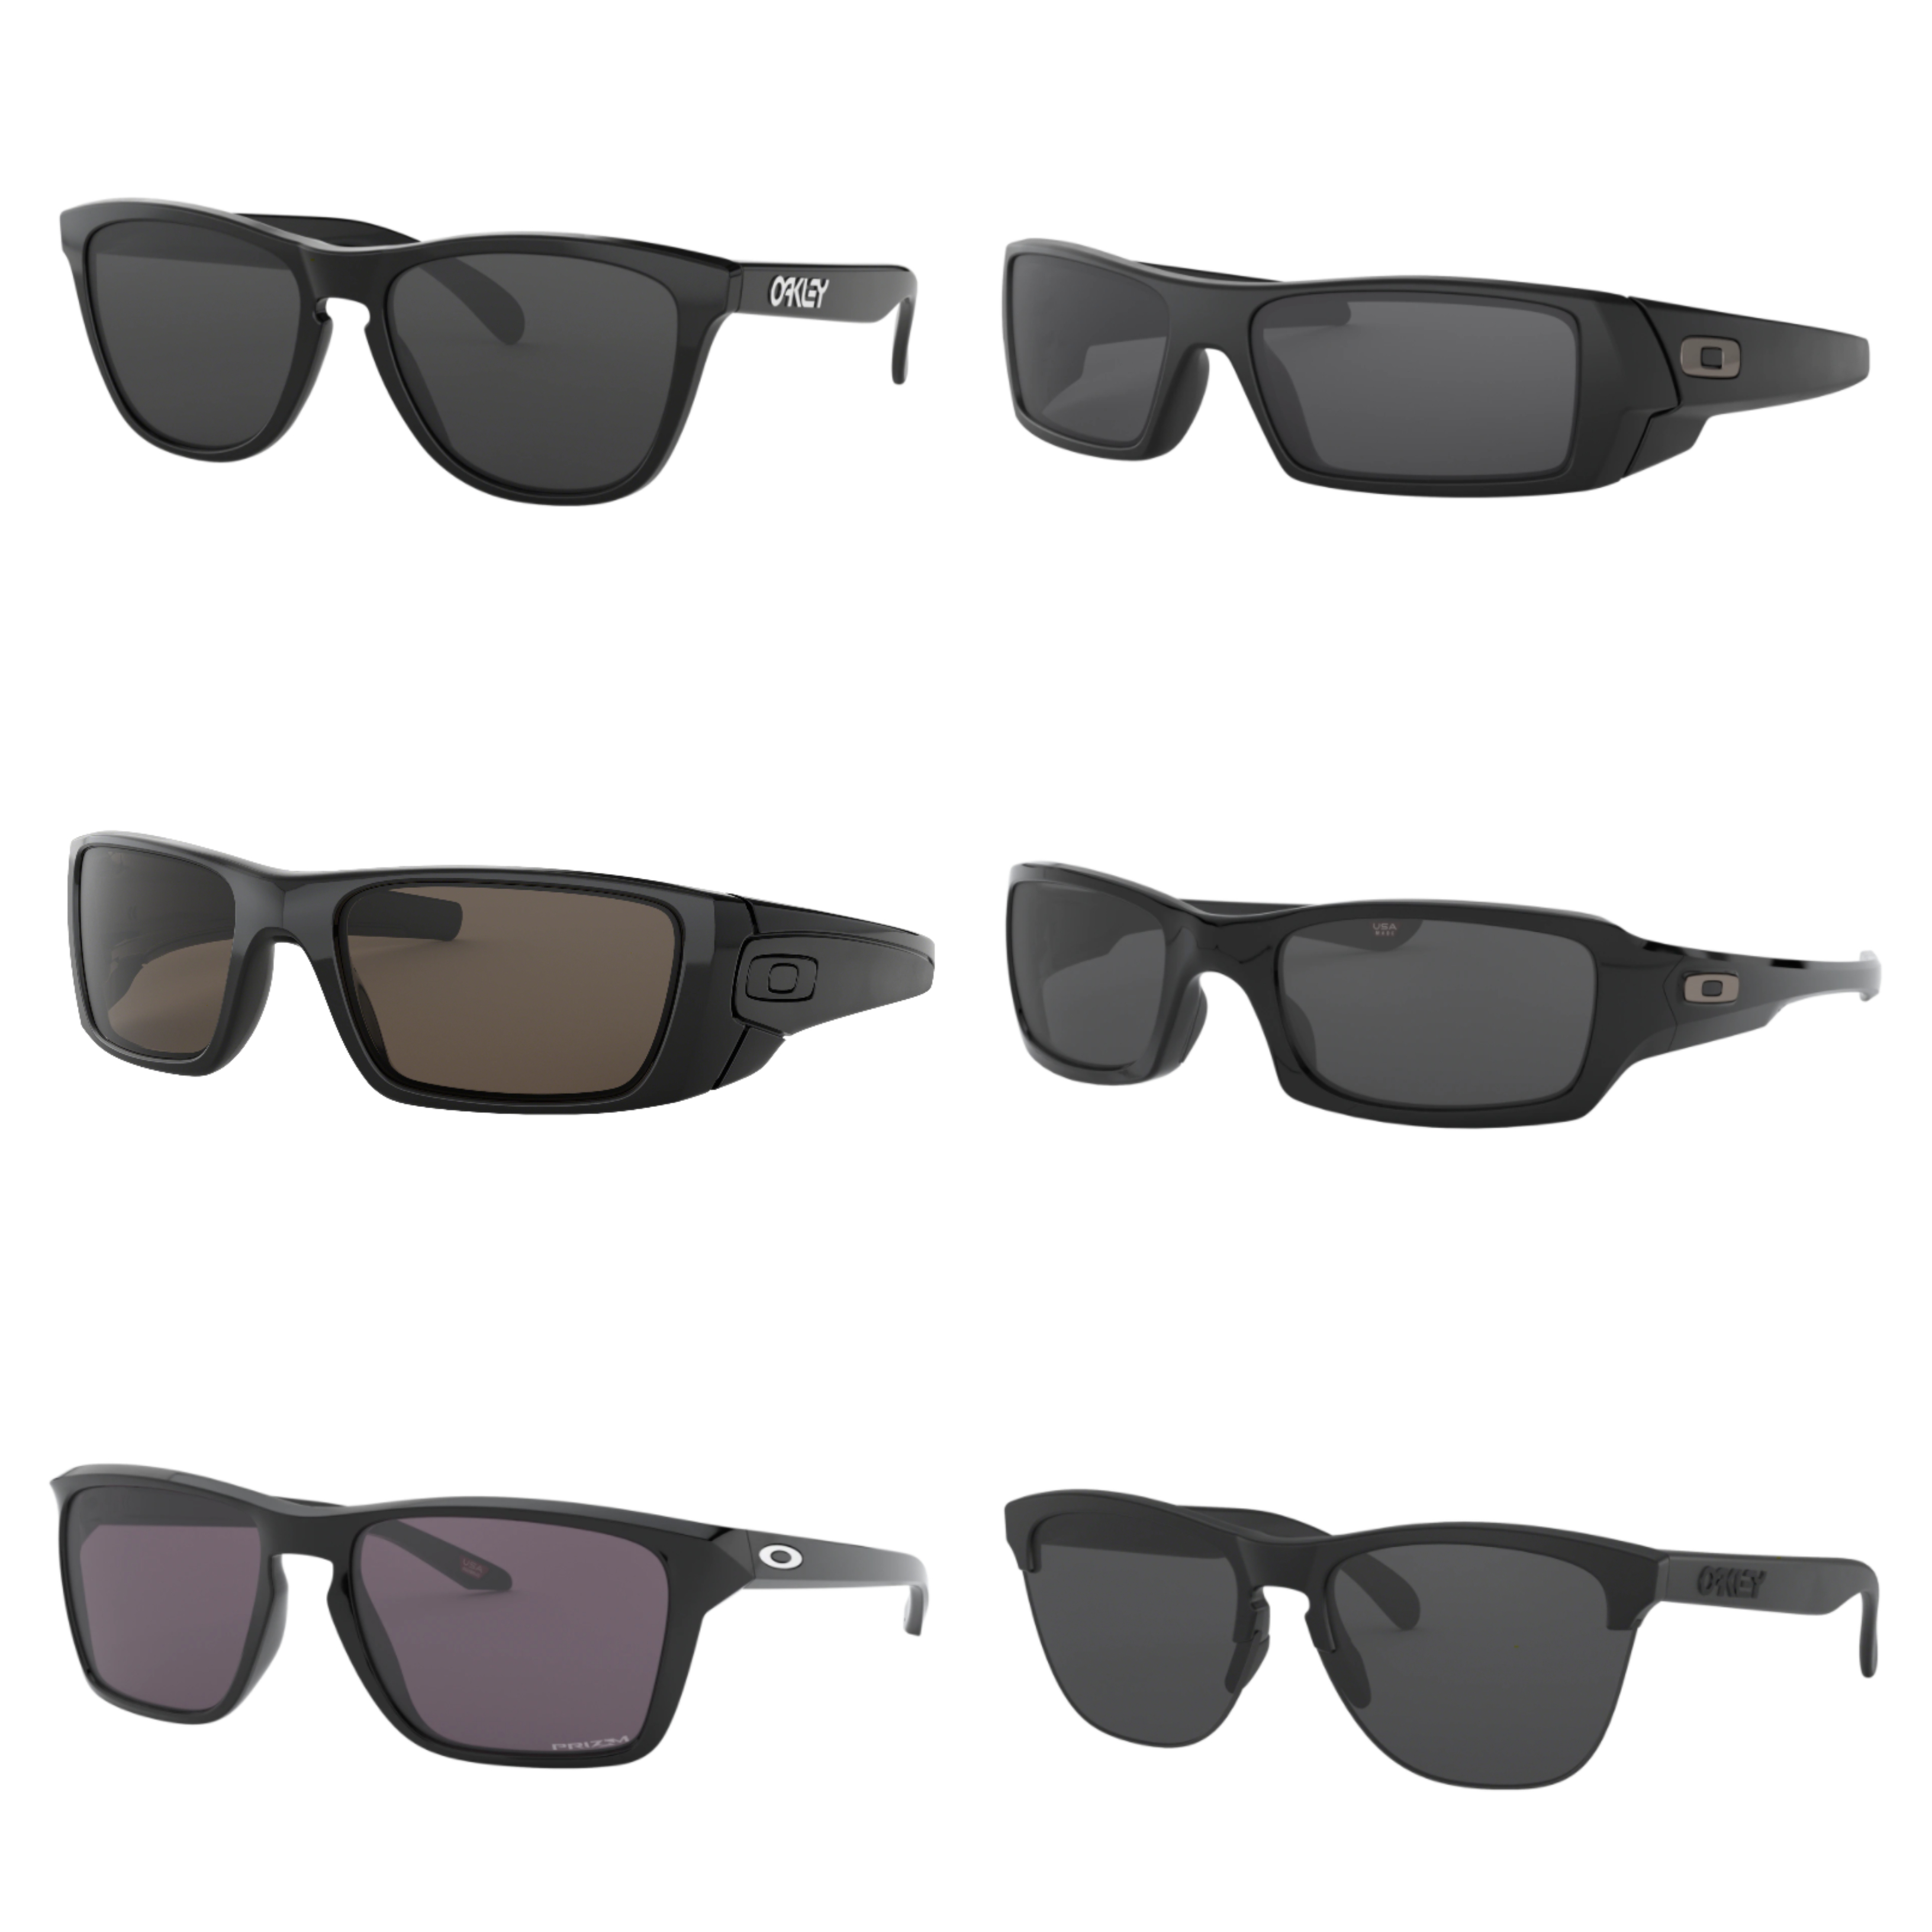 The Best Oakley Sunglasses Under $100 